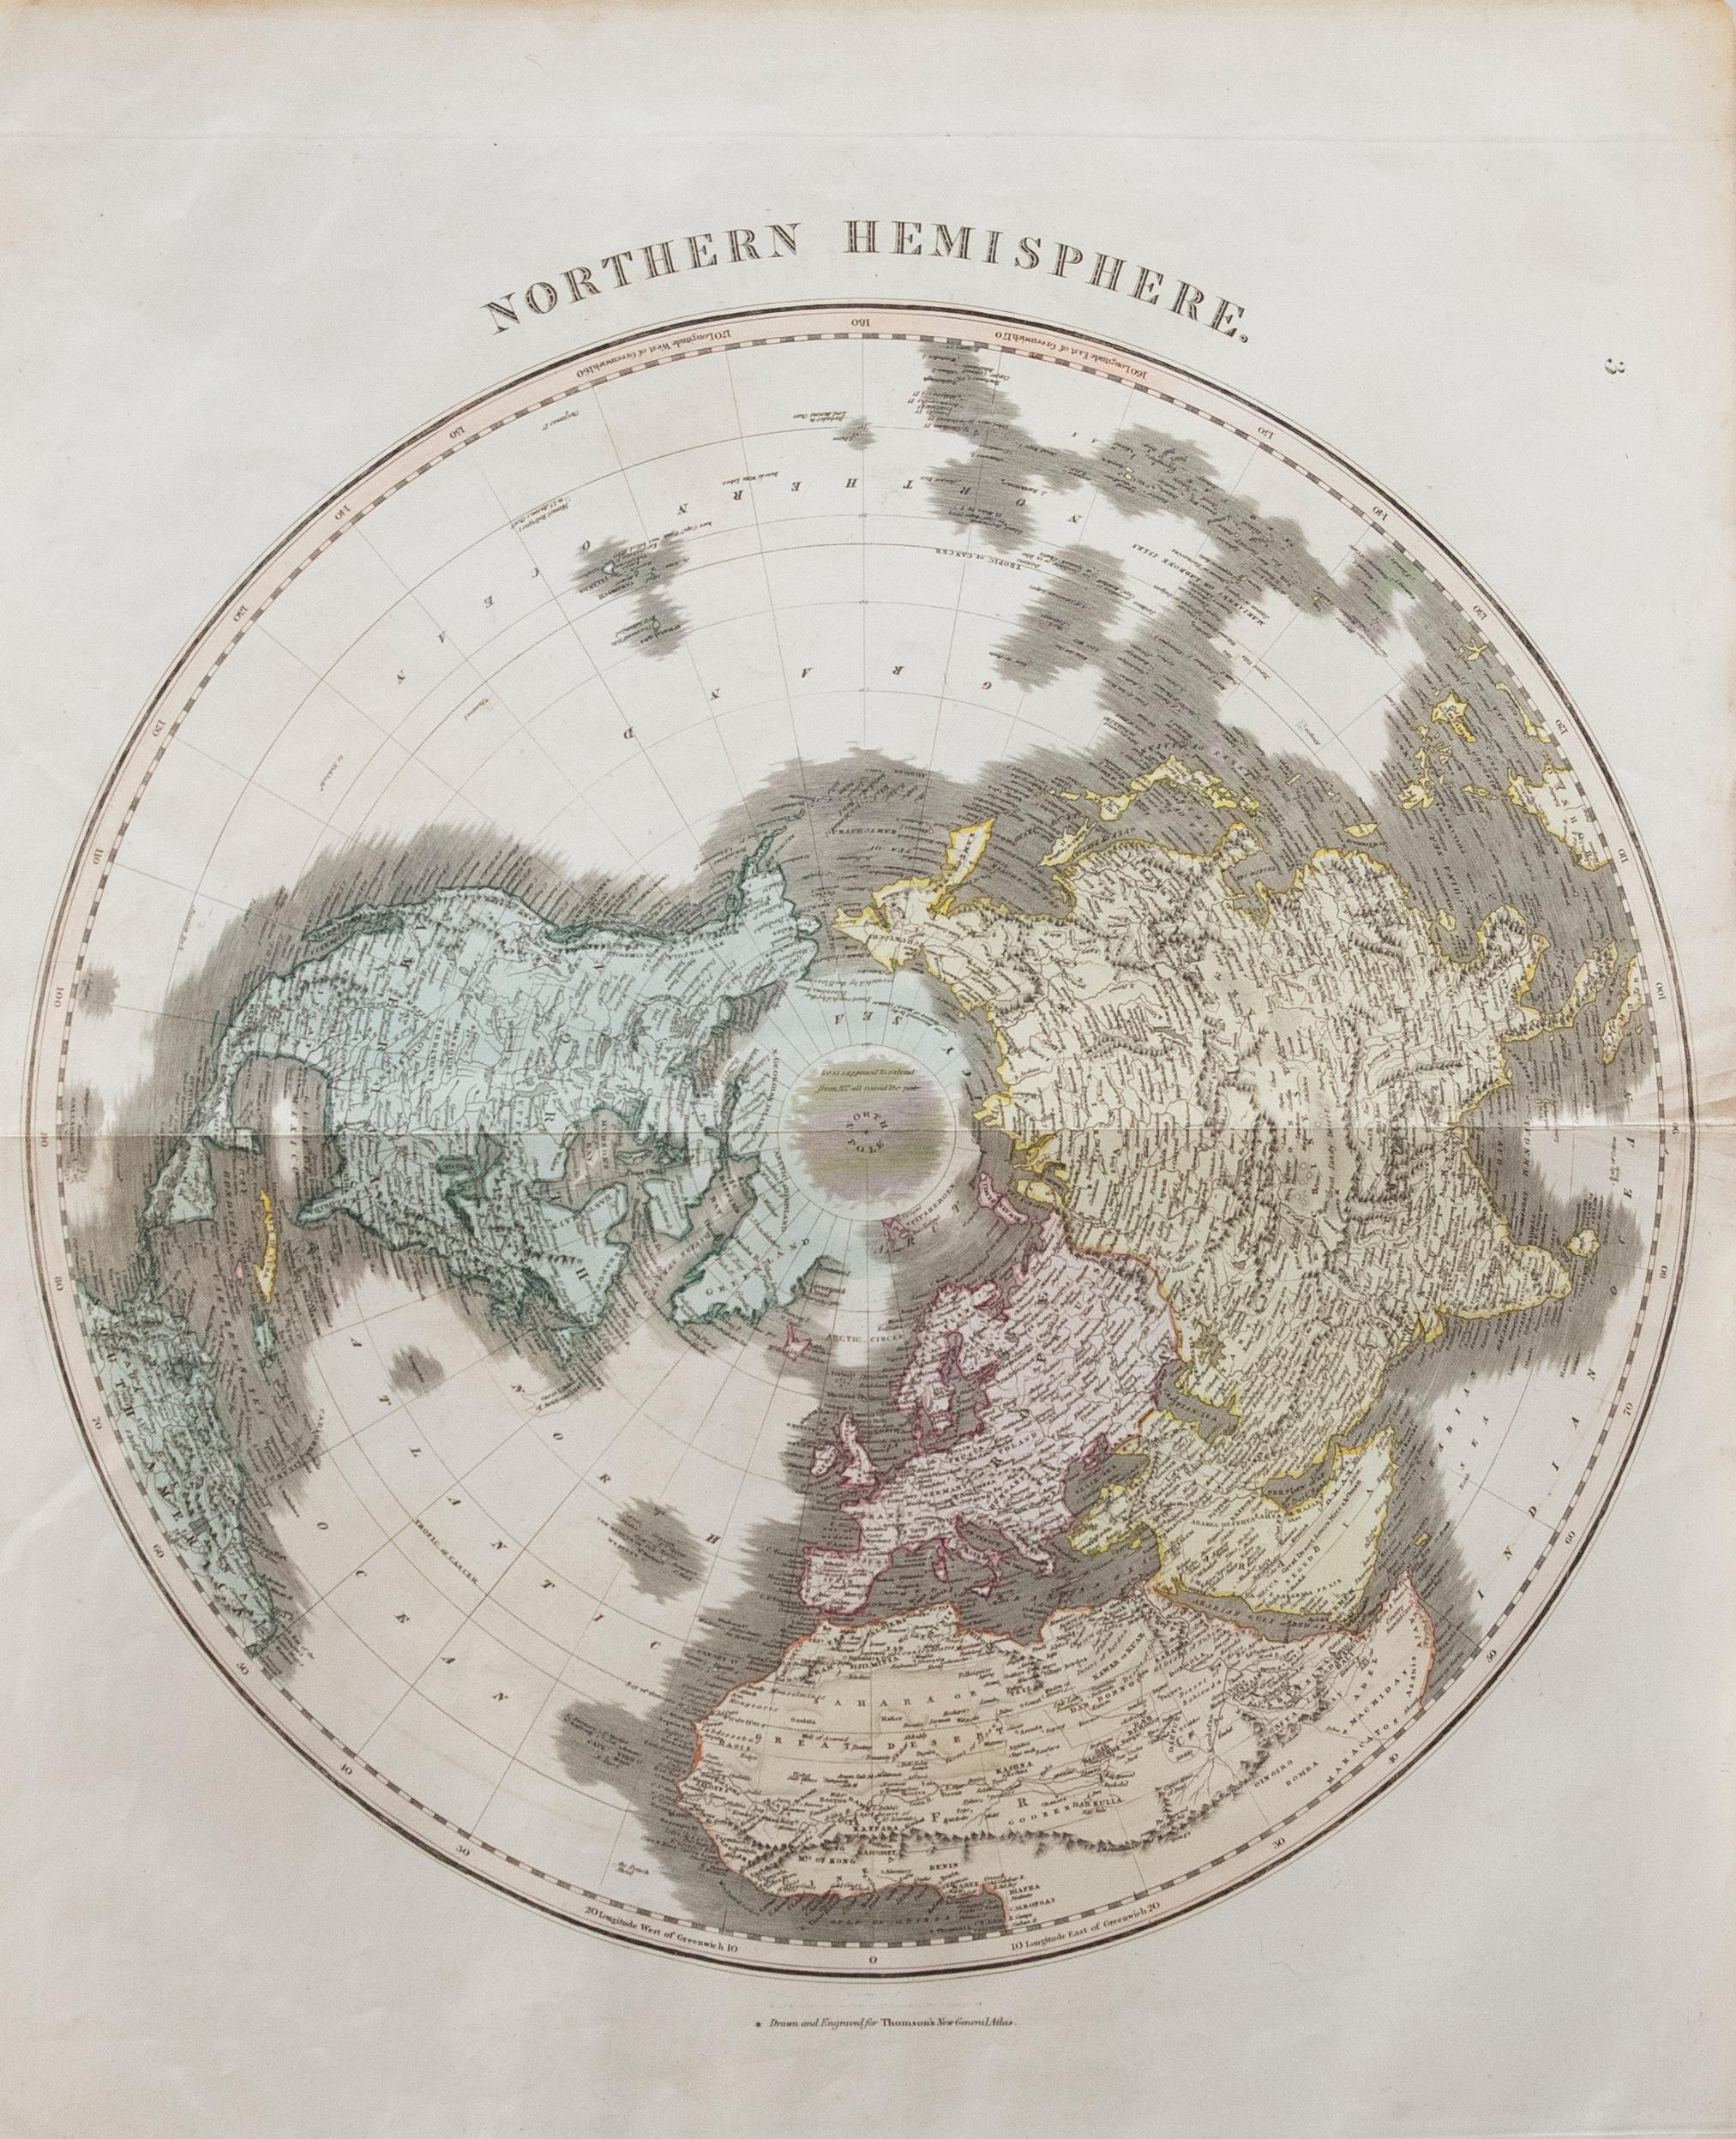 A fine engraved map of the Northern Hemisphere, from the second edition of John Thomson's 'New General Atlas' published in 1830. On paper.